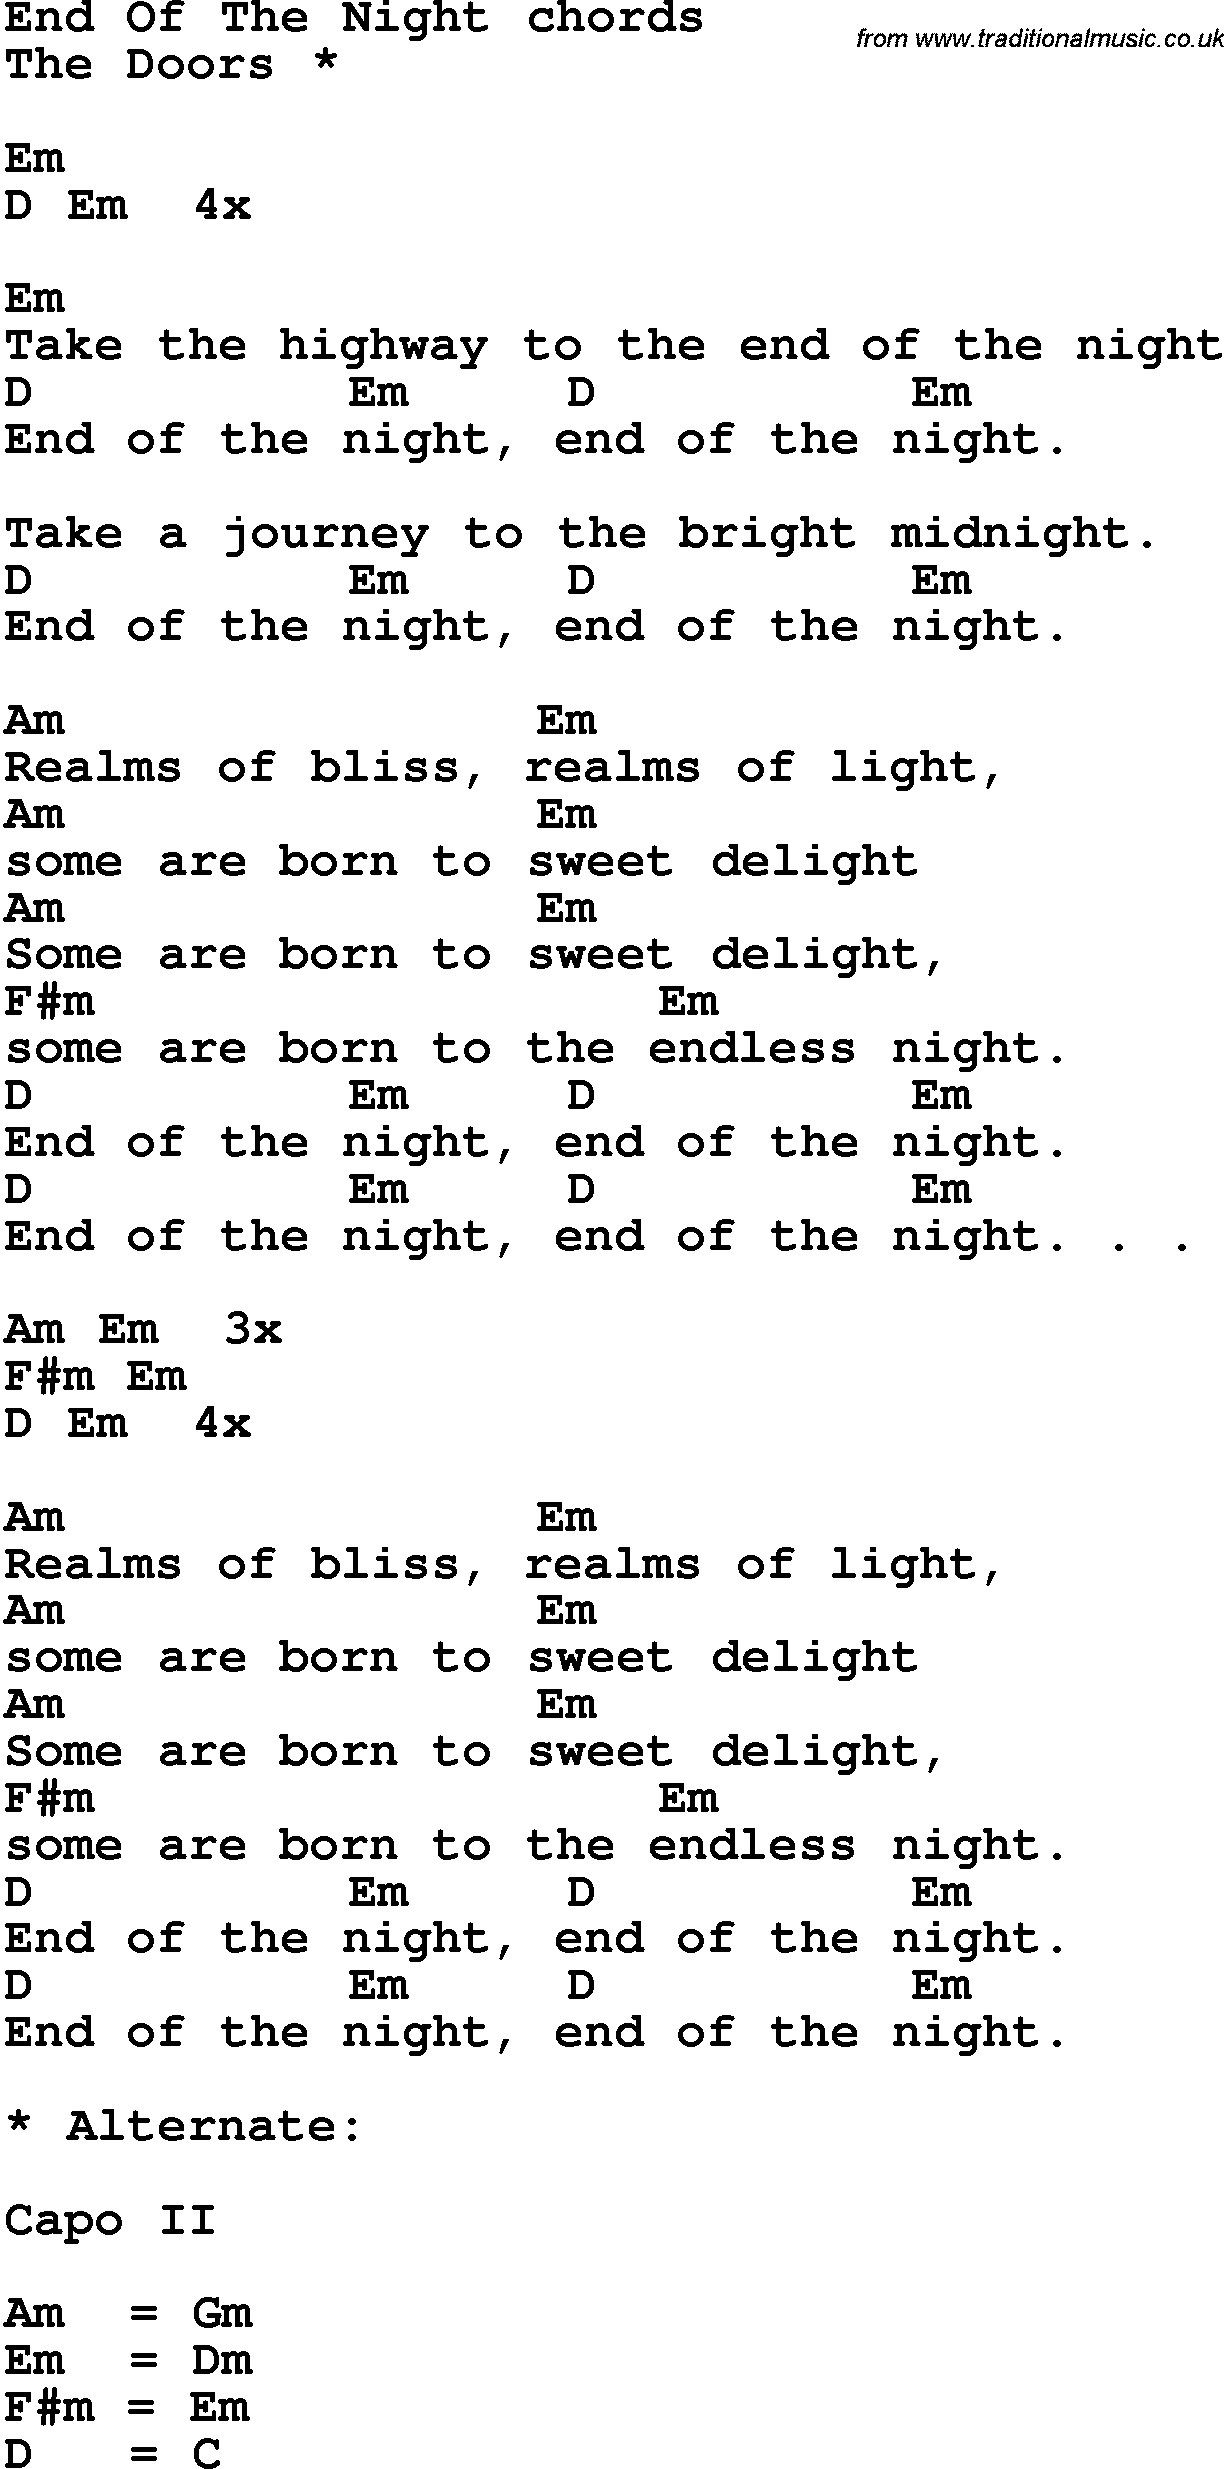 Song Lyrics with guitar chords for End Of The Night